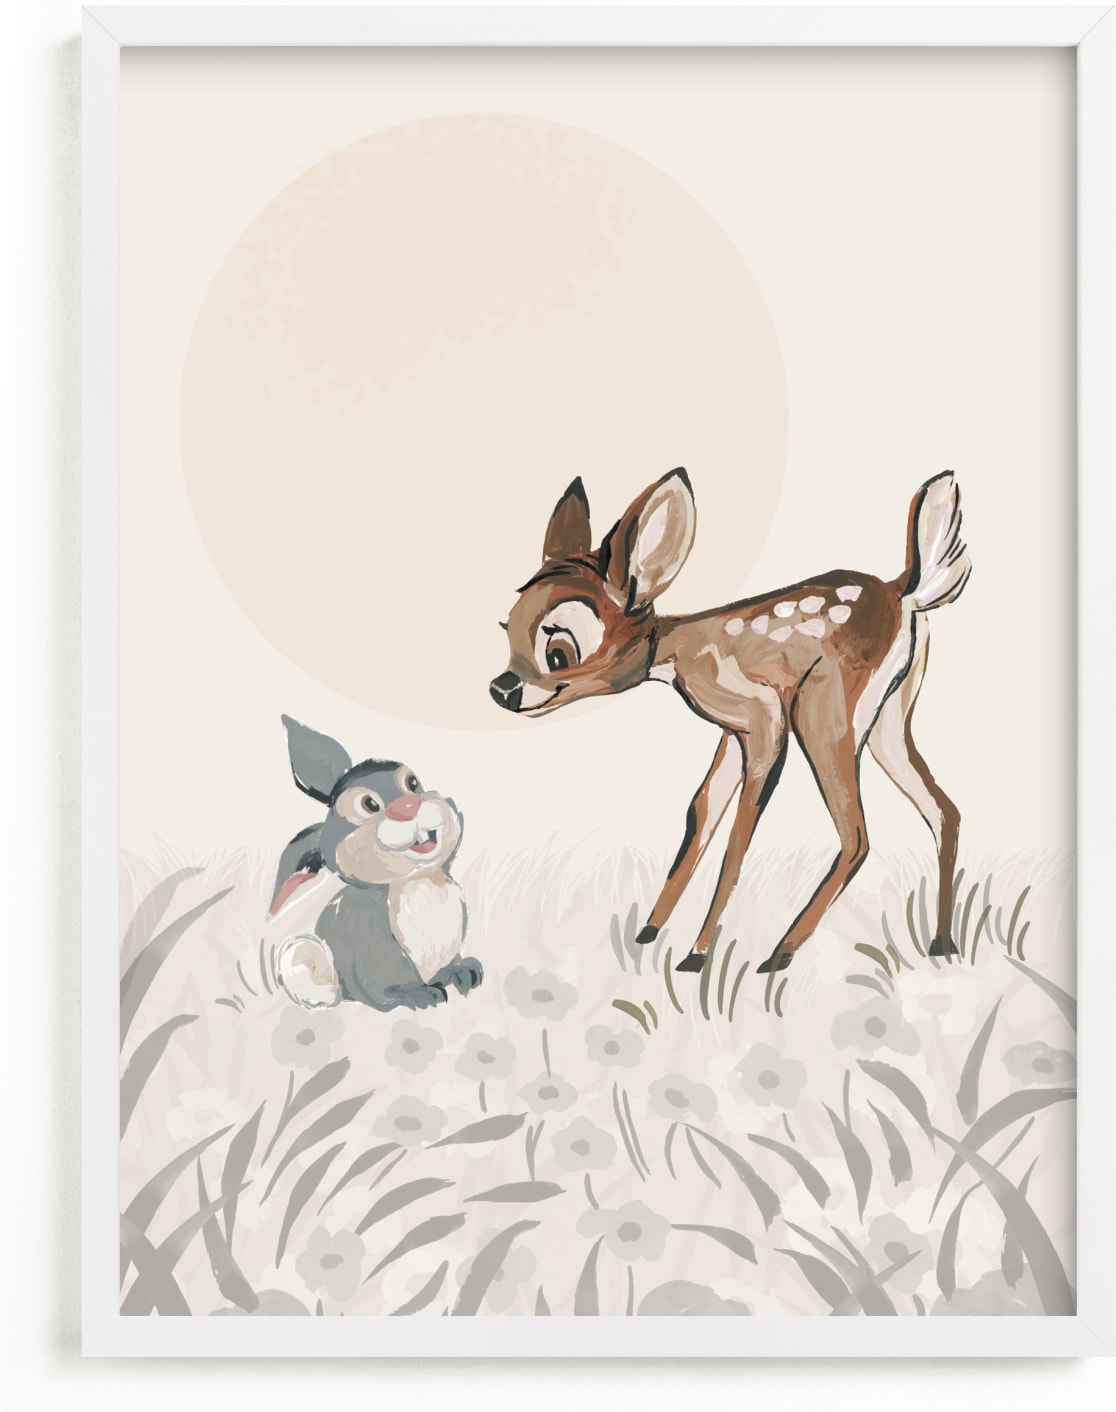 This is a brown disney art by Teju Reval called Disney's Bambi.